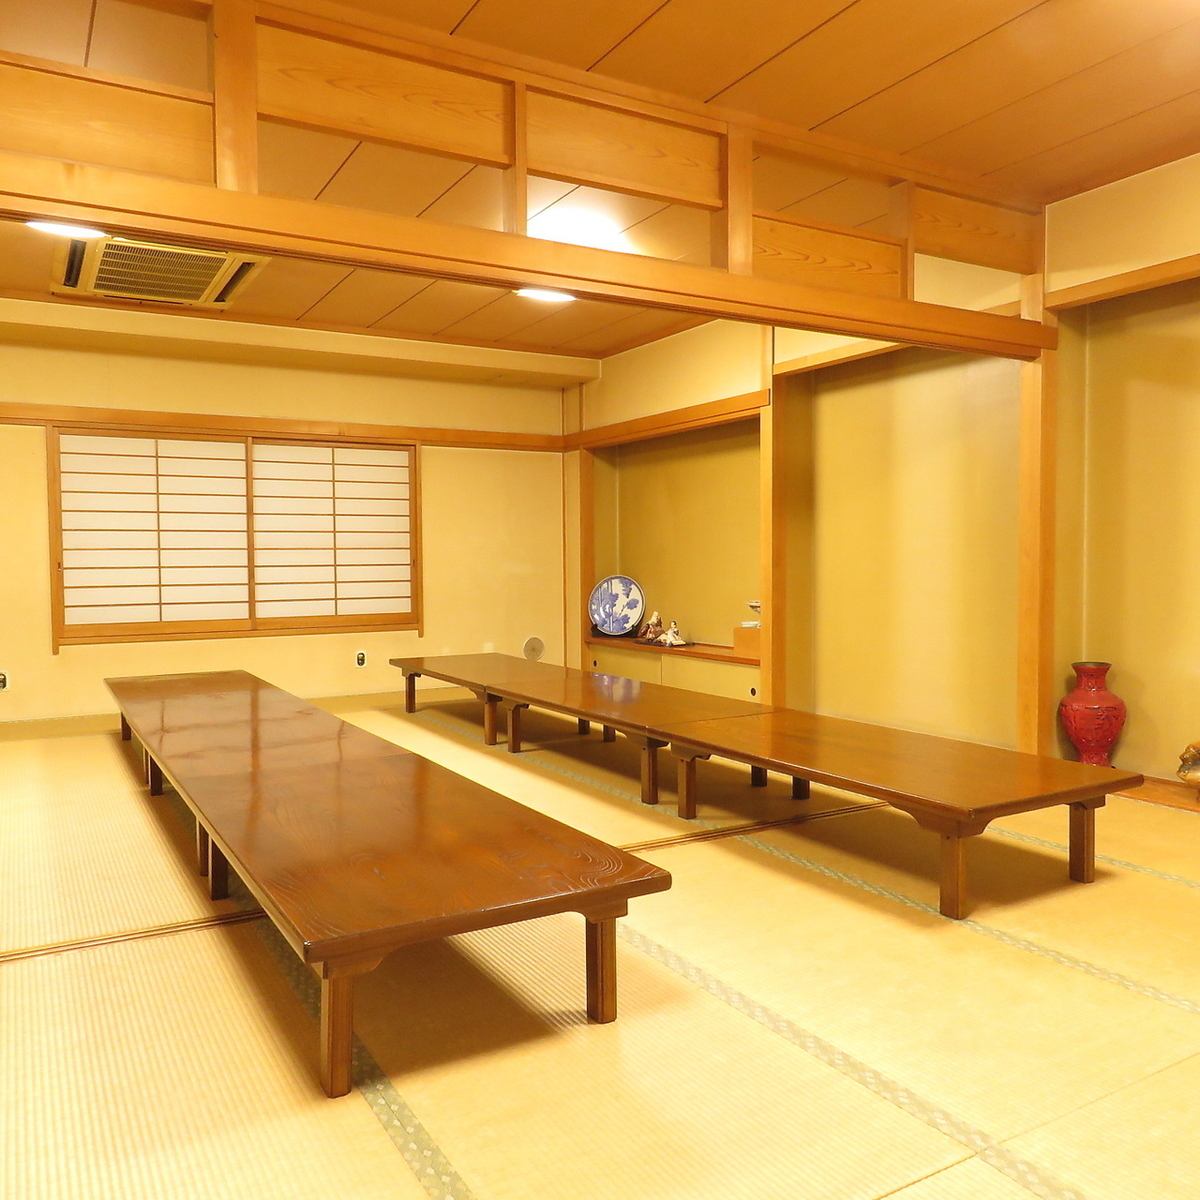 The private banquet hall can accommodate up to 30 people.Other small private rooms are also 〇